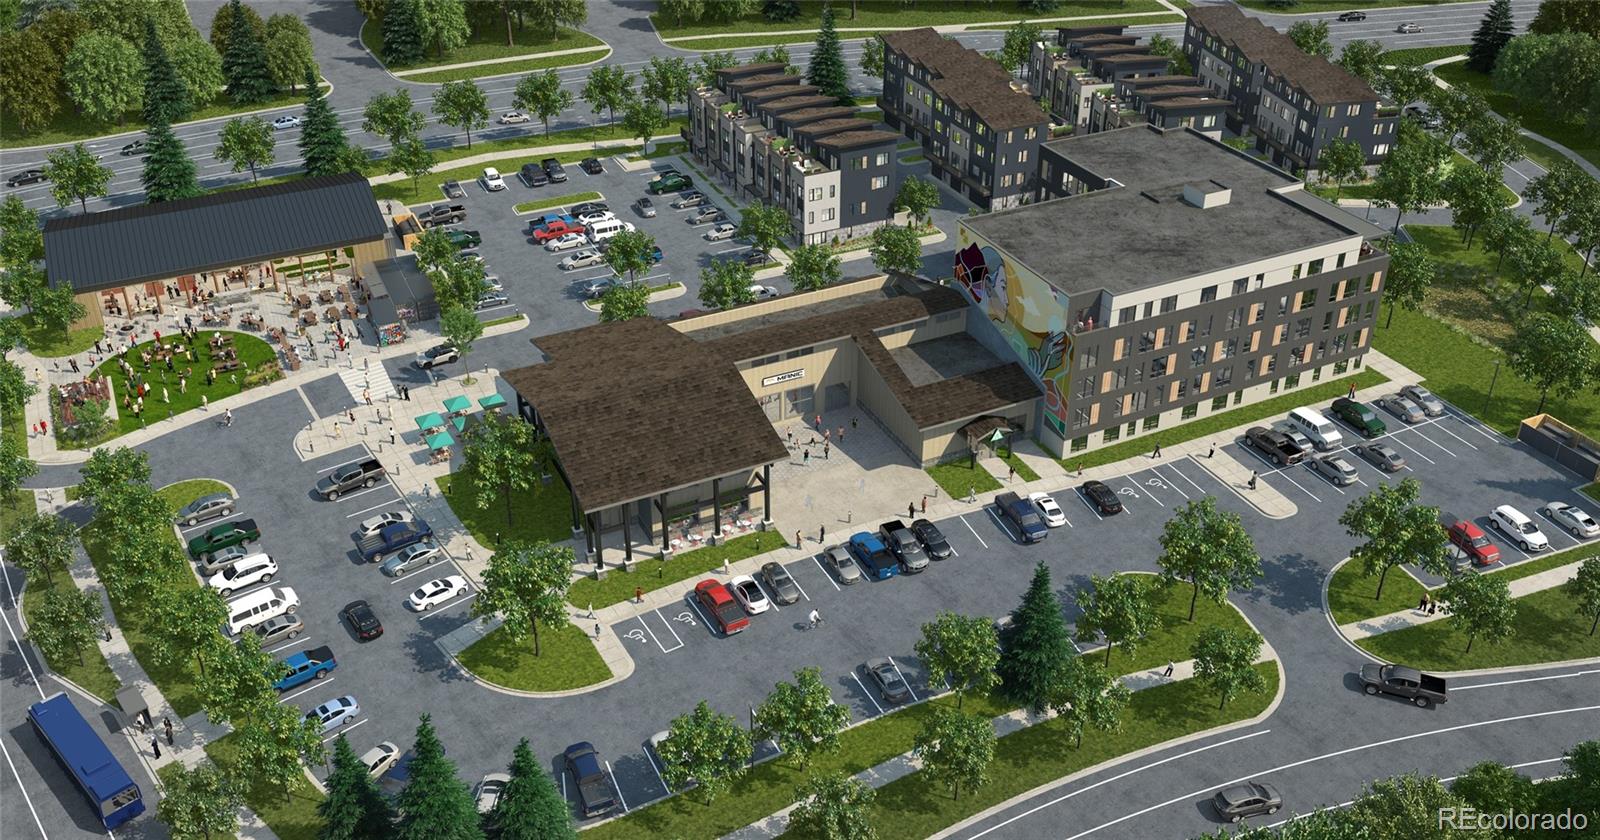 Capital Square Begins Construction of 119-Unit Steamboat Basecamp Multifamily Mixed-Use Development in Steamboat Springs, Colorado